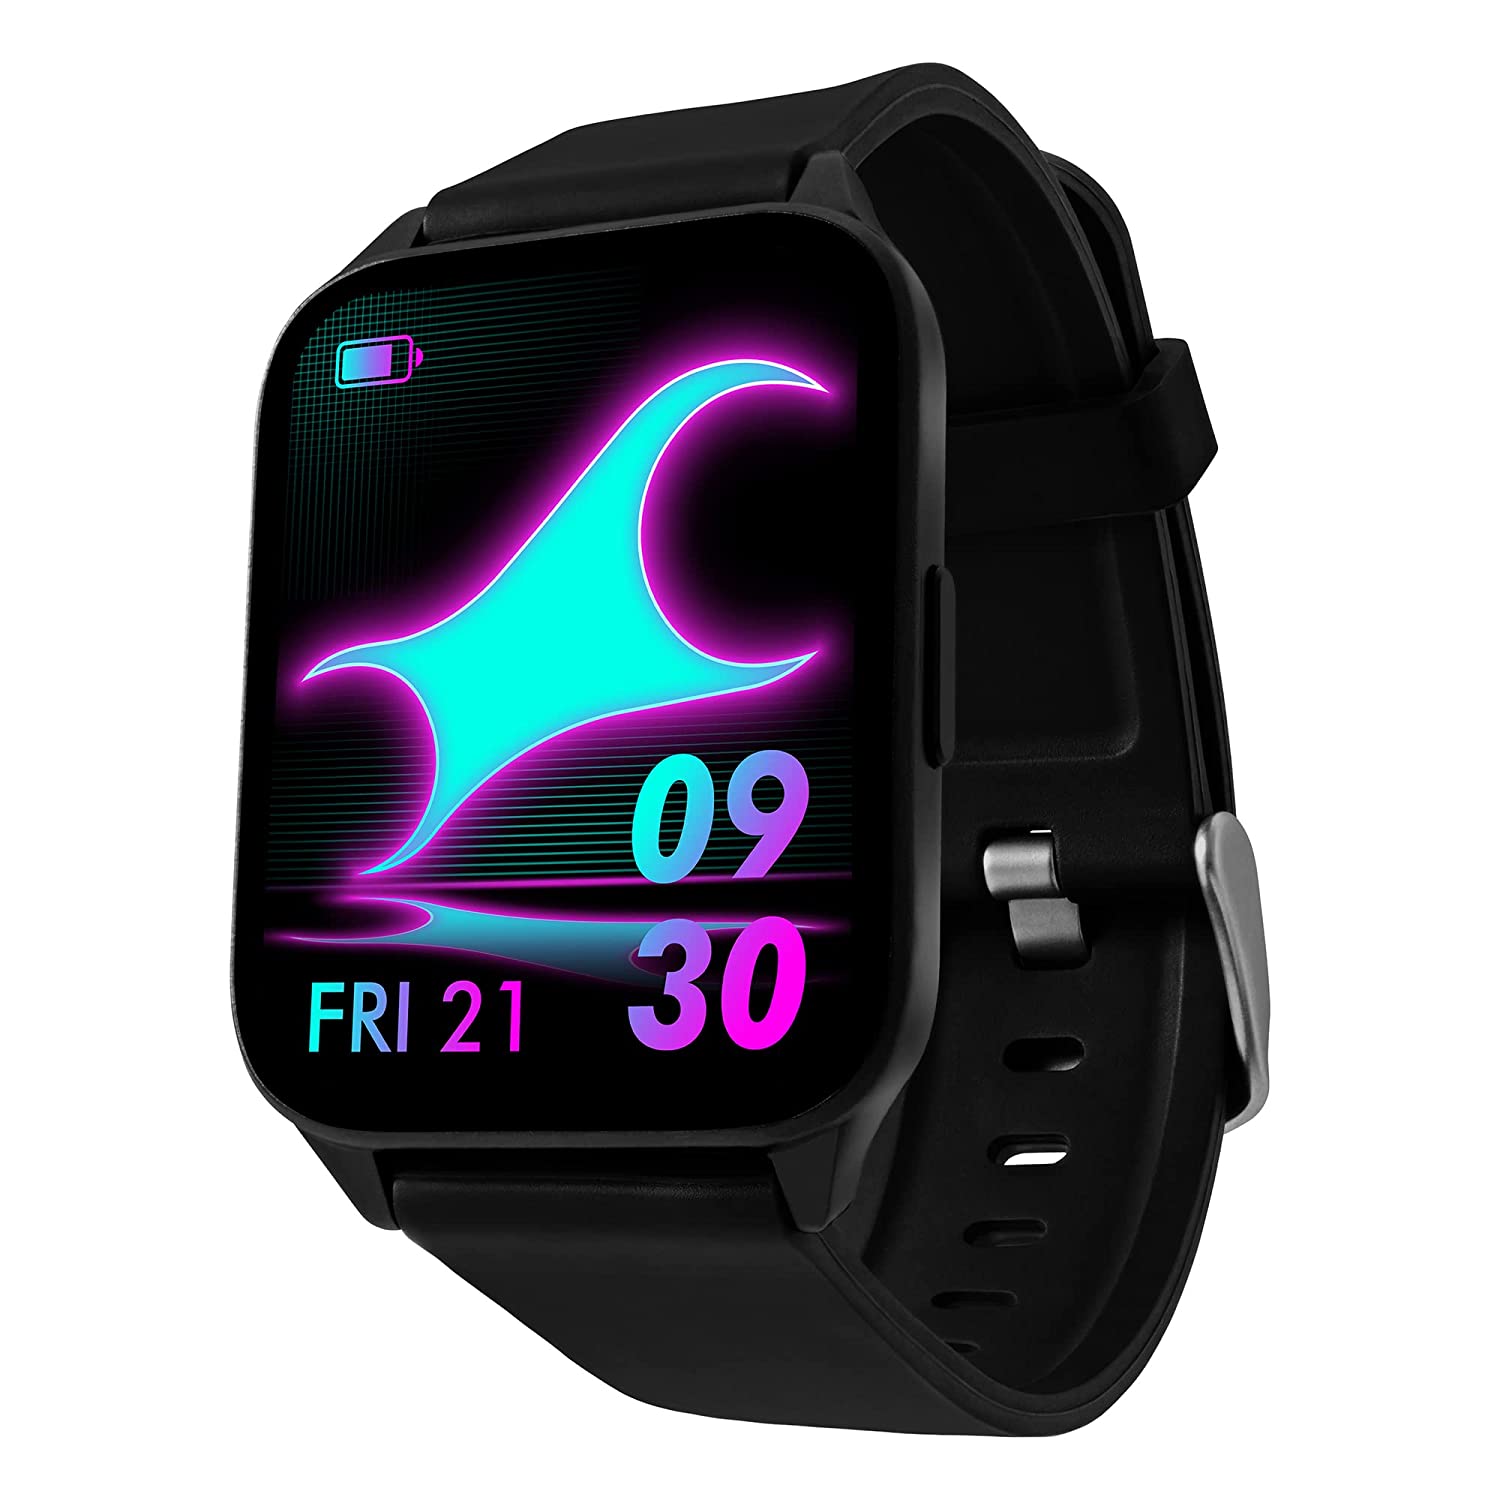 With “Reflex Beat+,” Fastrack joins the market for affordable smart wearables